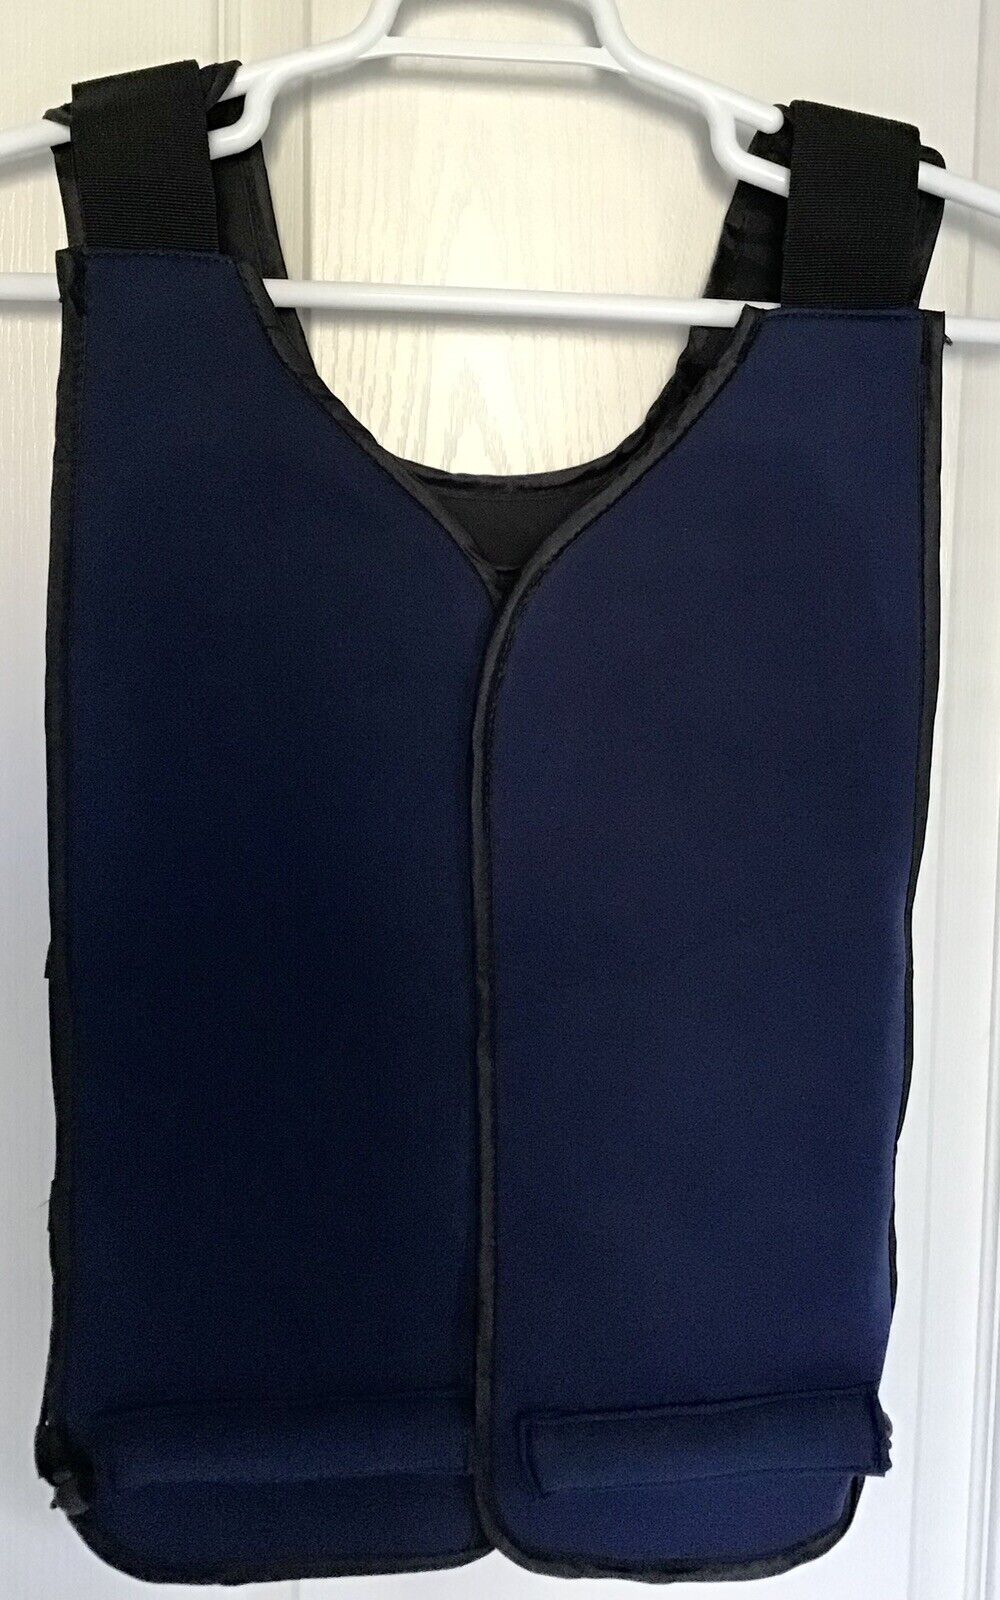 FlexiFreeze Ice Vest - Personal Cooling Cold Vest for Heat Relief,  Navy